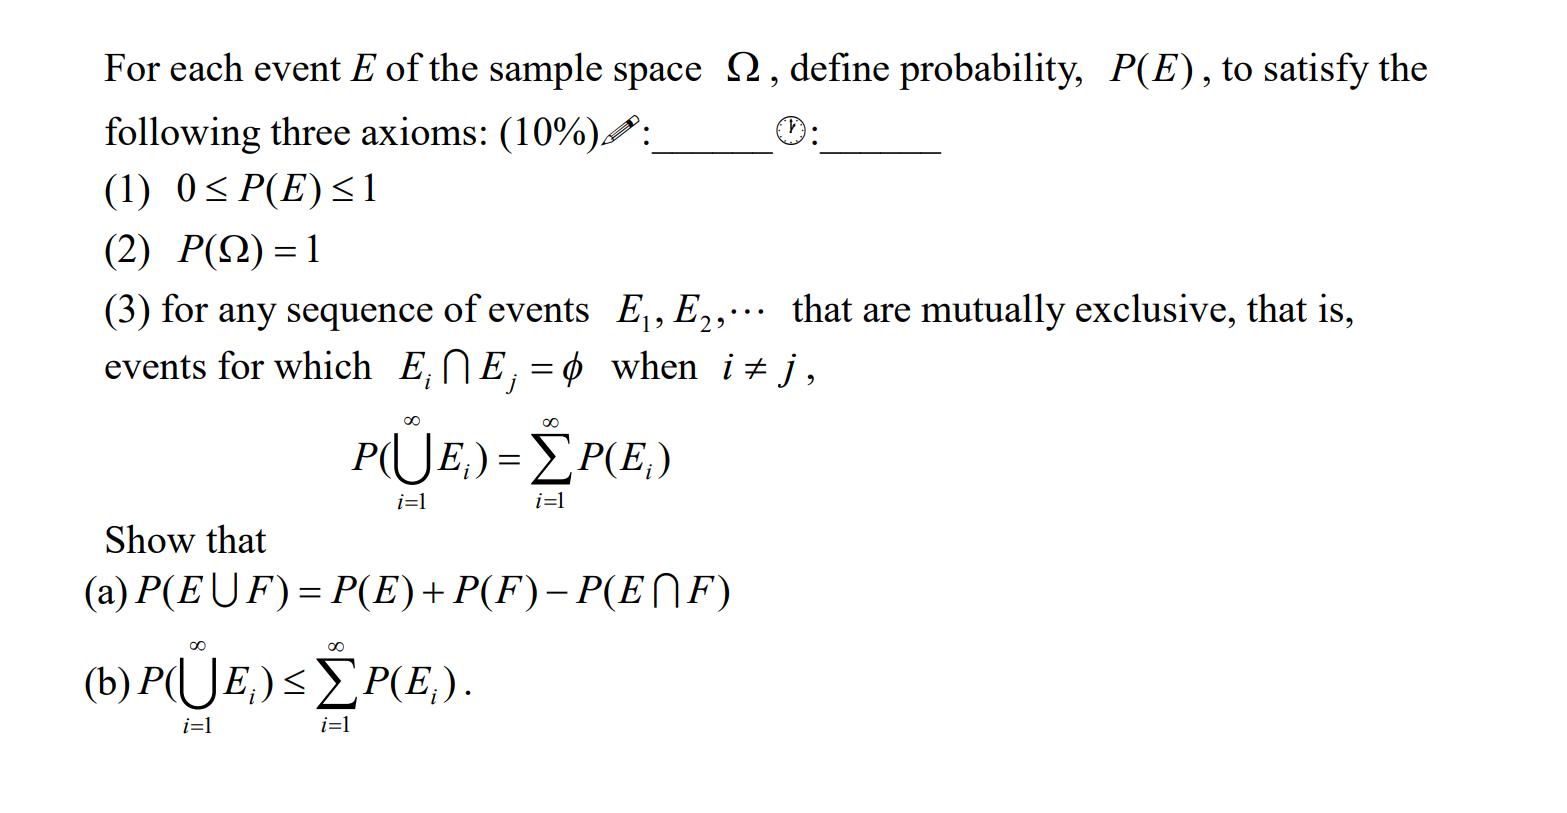 For each event E of the sample space , define probability, P(E), to satisfy the following three axioms: